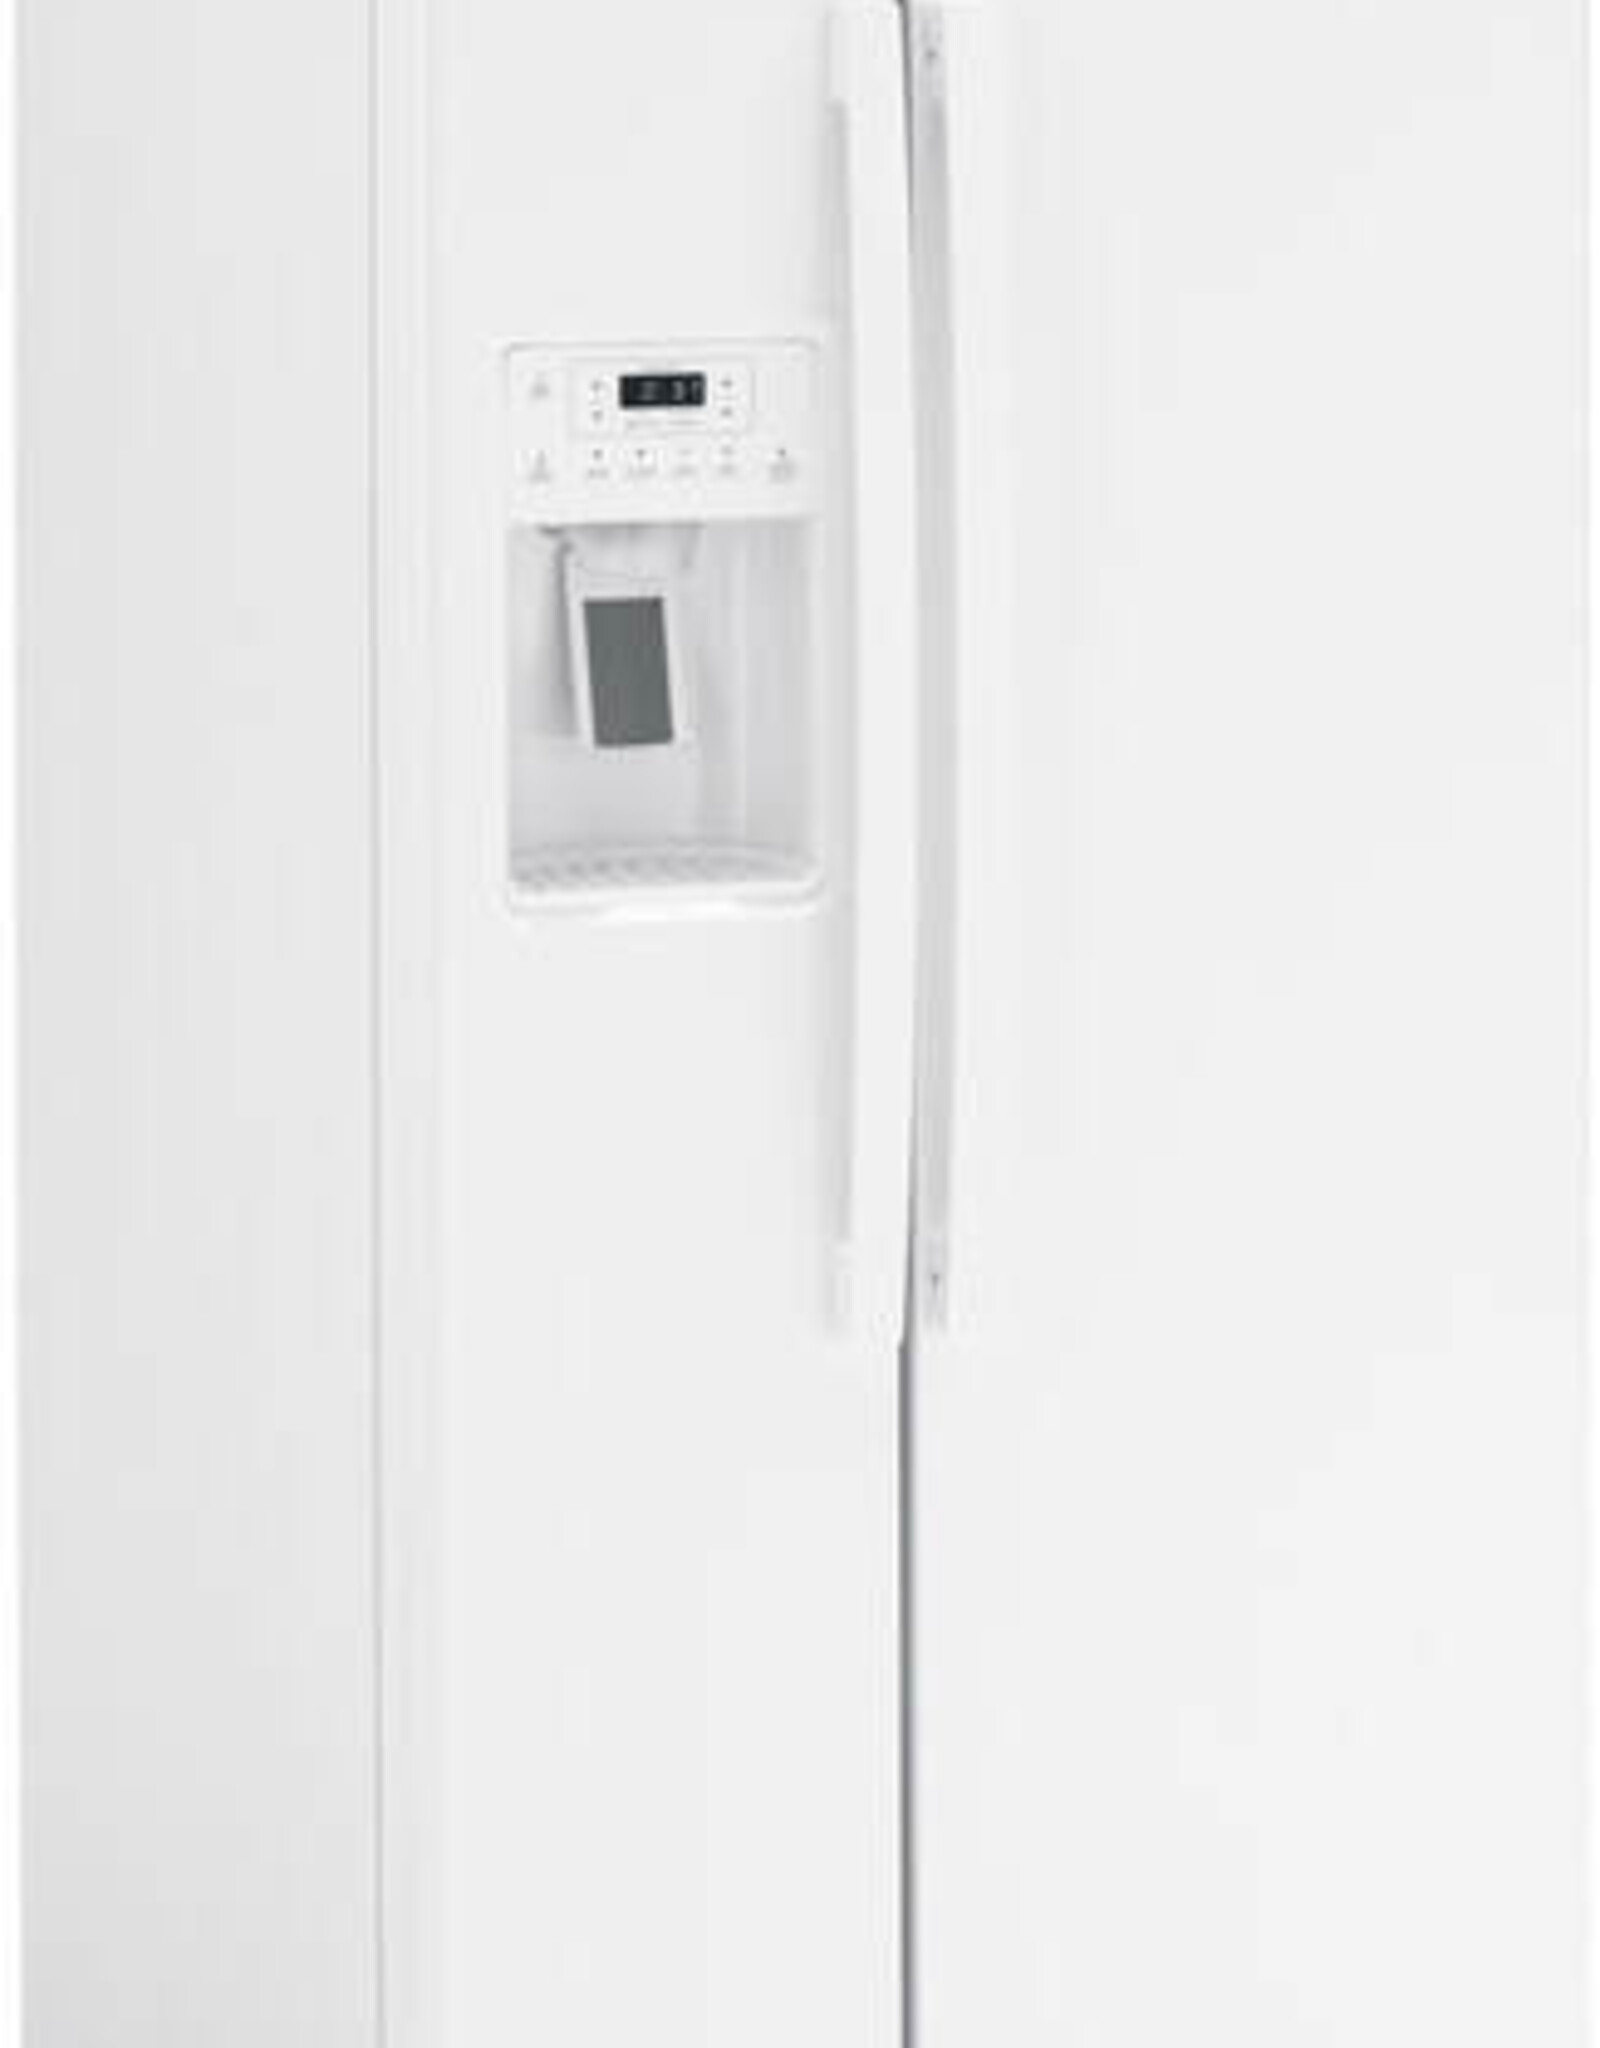 CLS Crosley 25.3 Side by Side Refrigerator : White- CLS